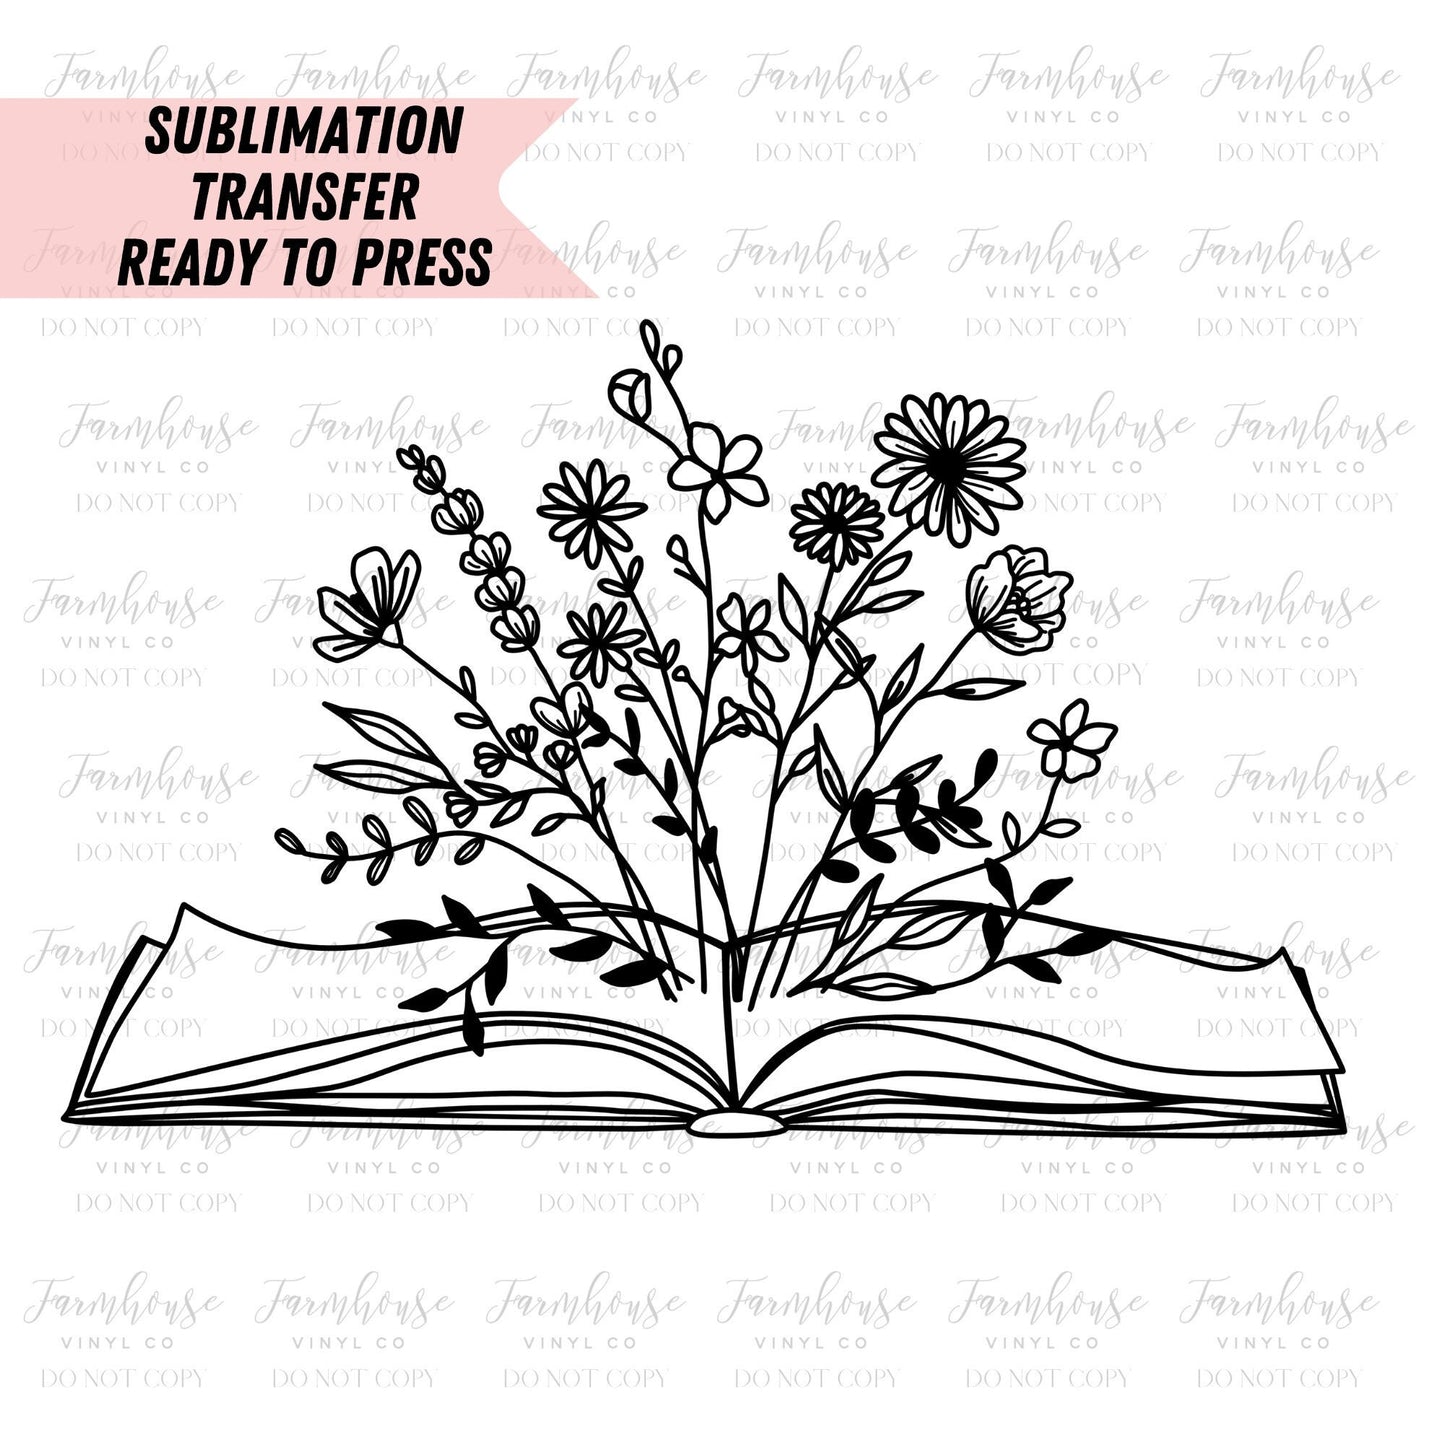 Floral Open Book Spring Flowers, Ready To Press, Sublimation Transfers, Sublimation Prints, Transfer Ready To Press - Farmhouse Vinyl Co